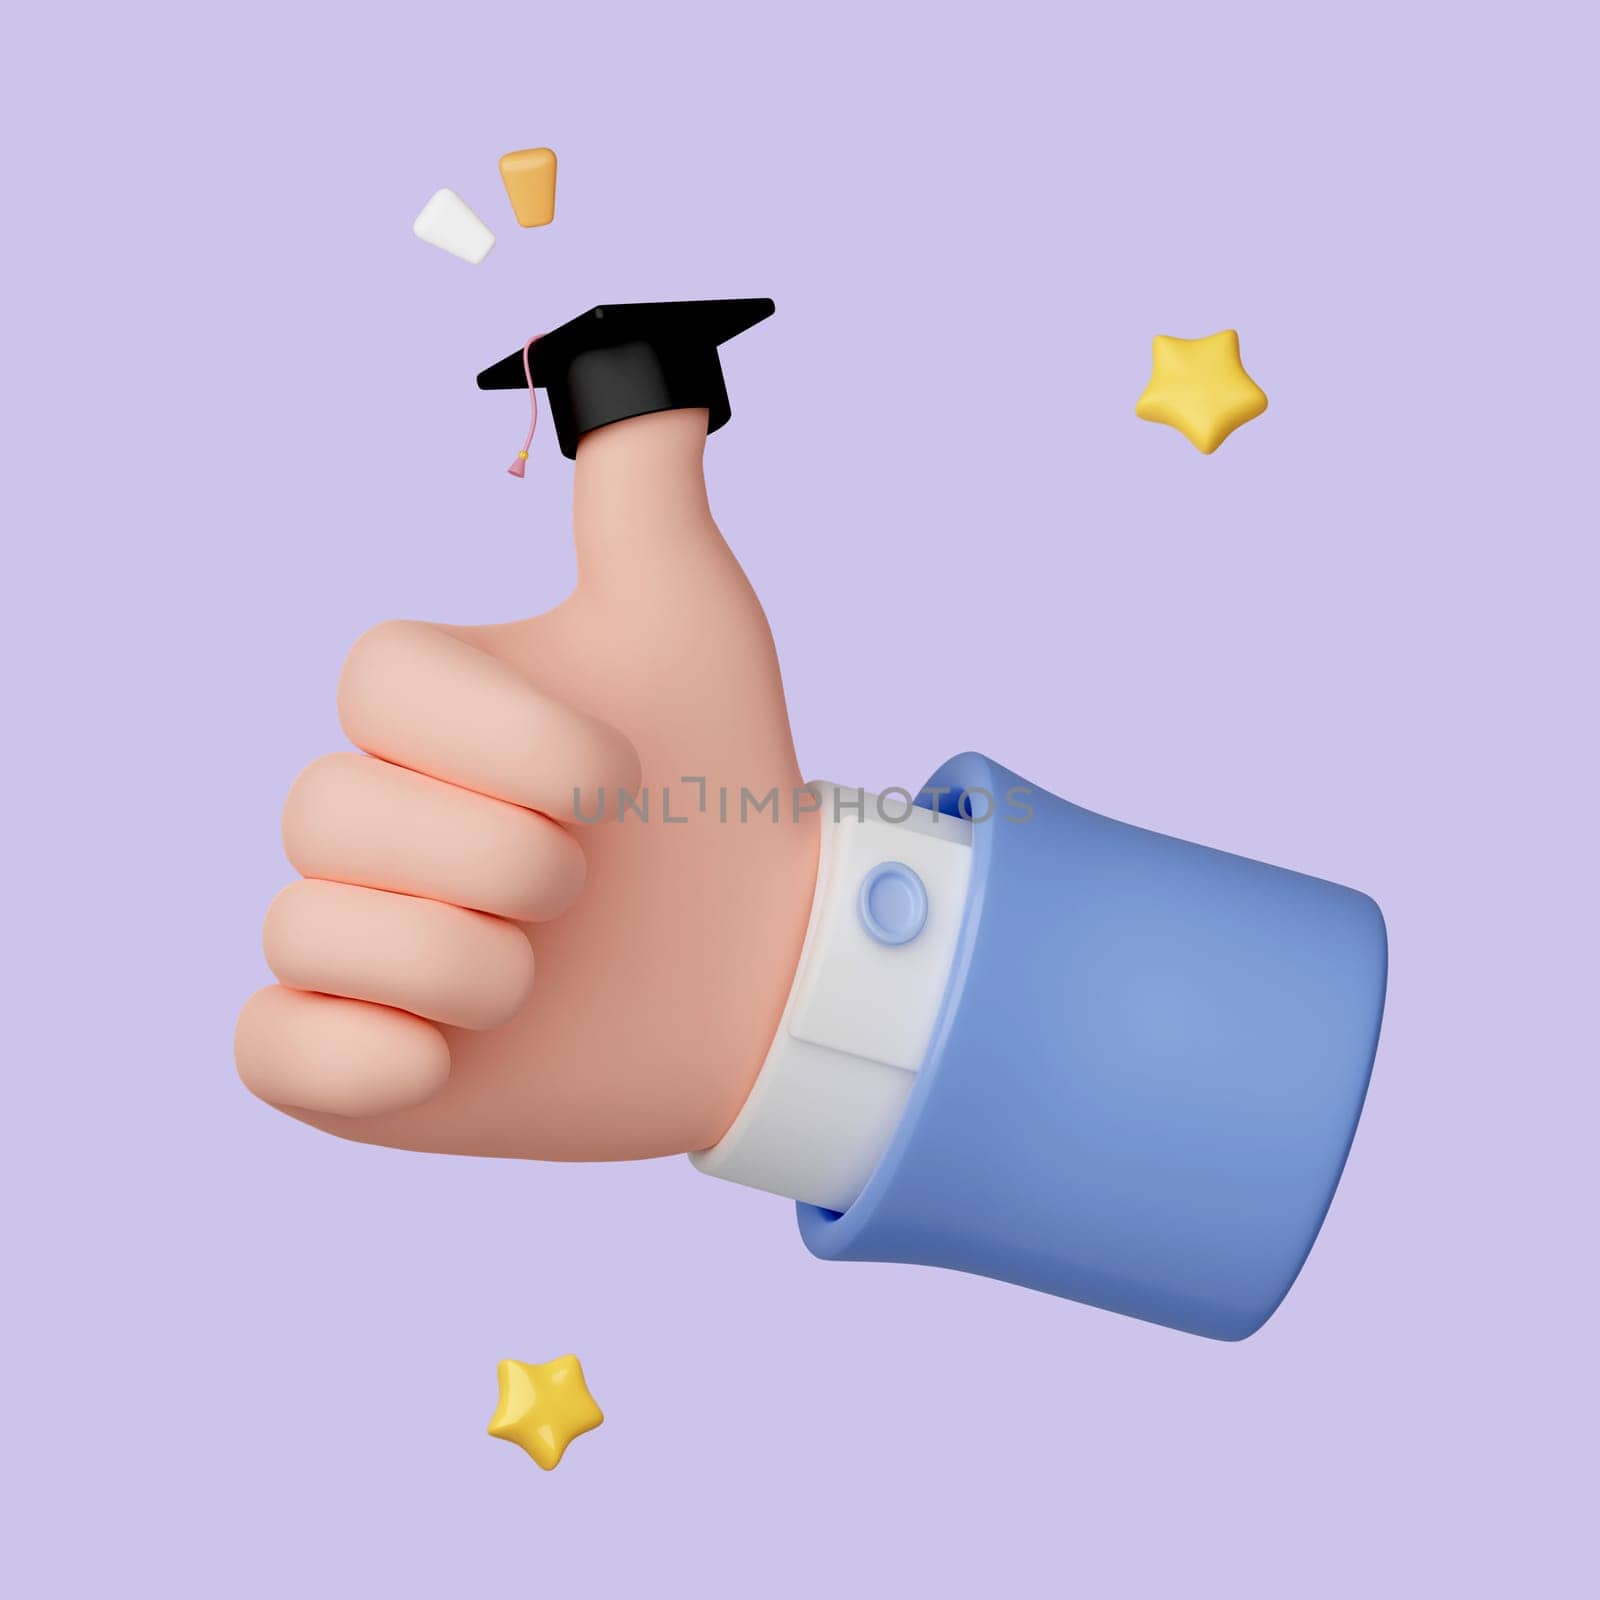 3D cartoon thumb up hand gesture with graduation cap isolated on pastel background. icon symbol clipping path. education. 3d render illustration.